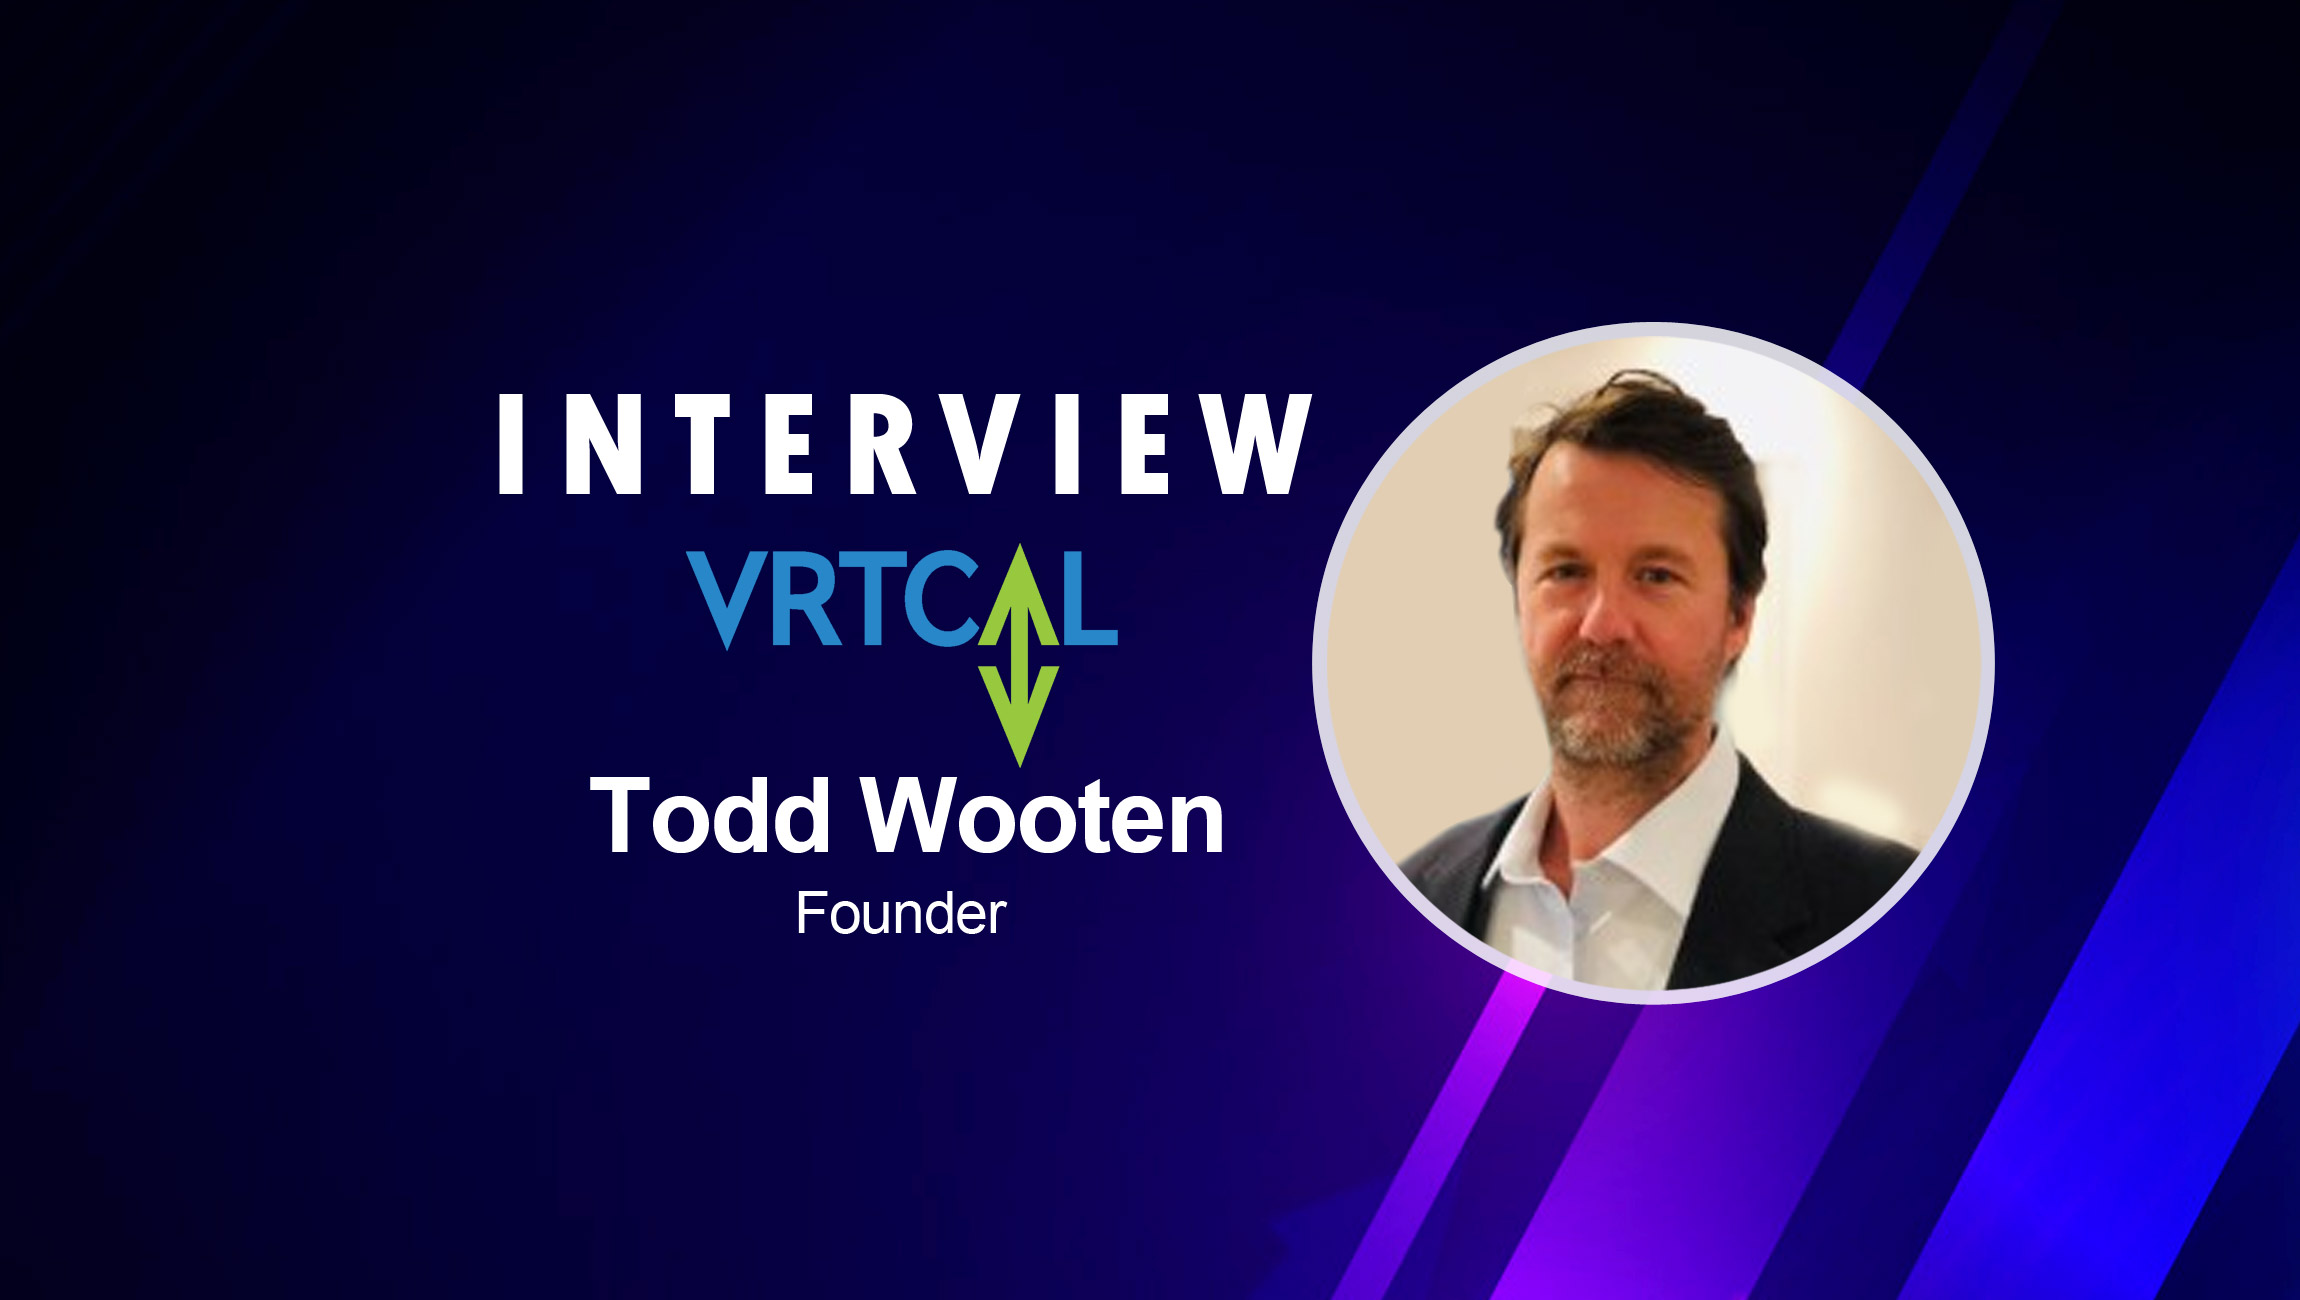 SalesTechStar Interview with Todd Wooten, Founder and President of VRTCAL